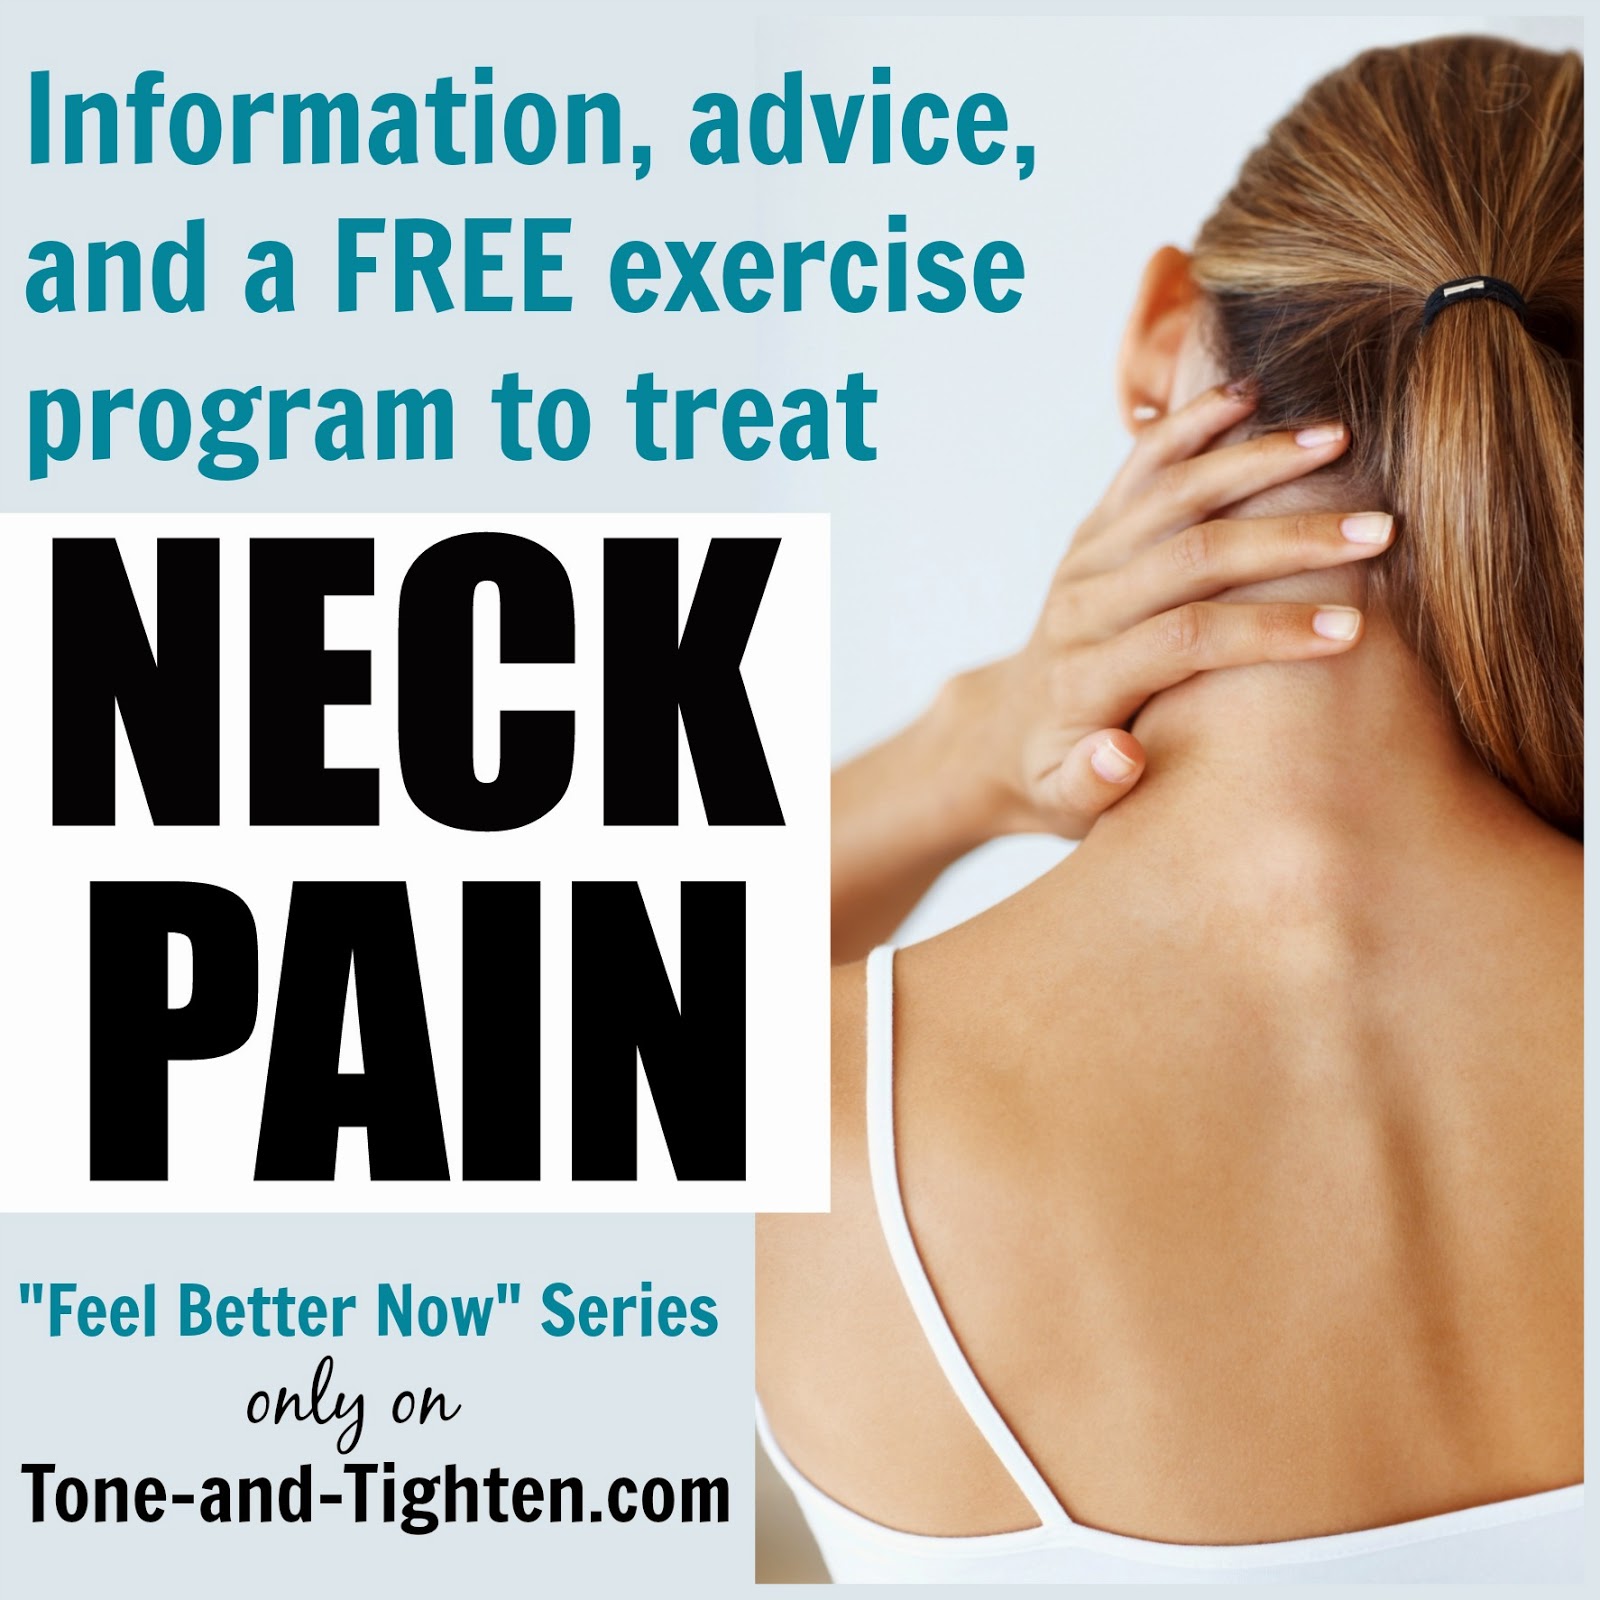 Feel Better Now Series – Home exercises to treat neck pain – Part 2